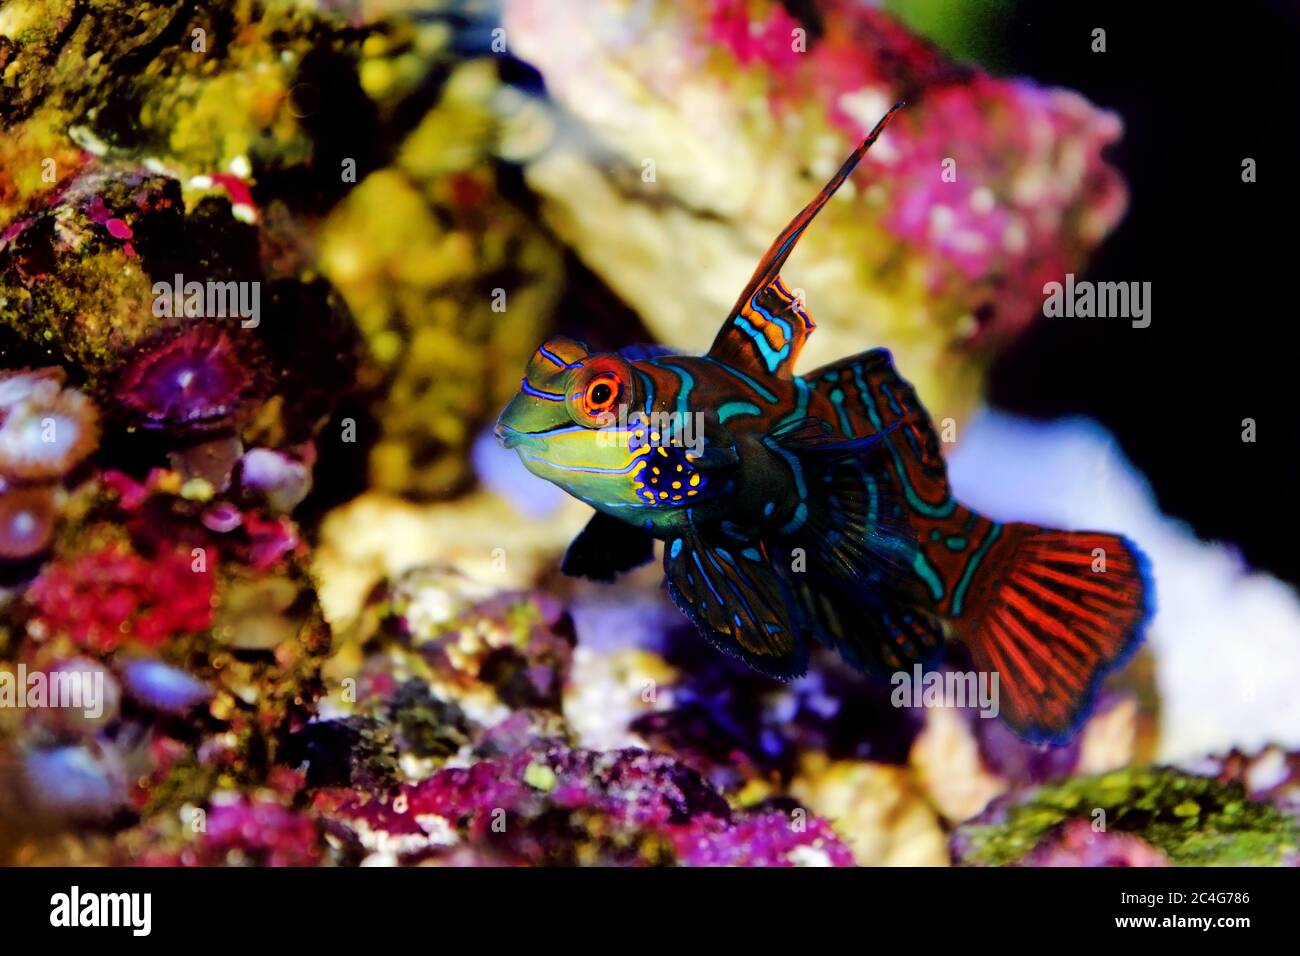 The Mandarin fish, one of the most colorful saltwater fish (Synchiropus splendidus) Stock Photo